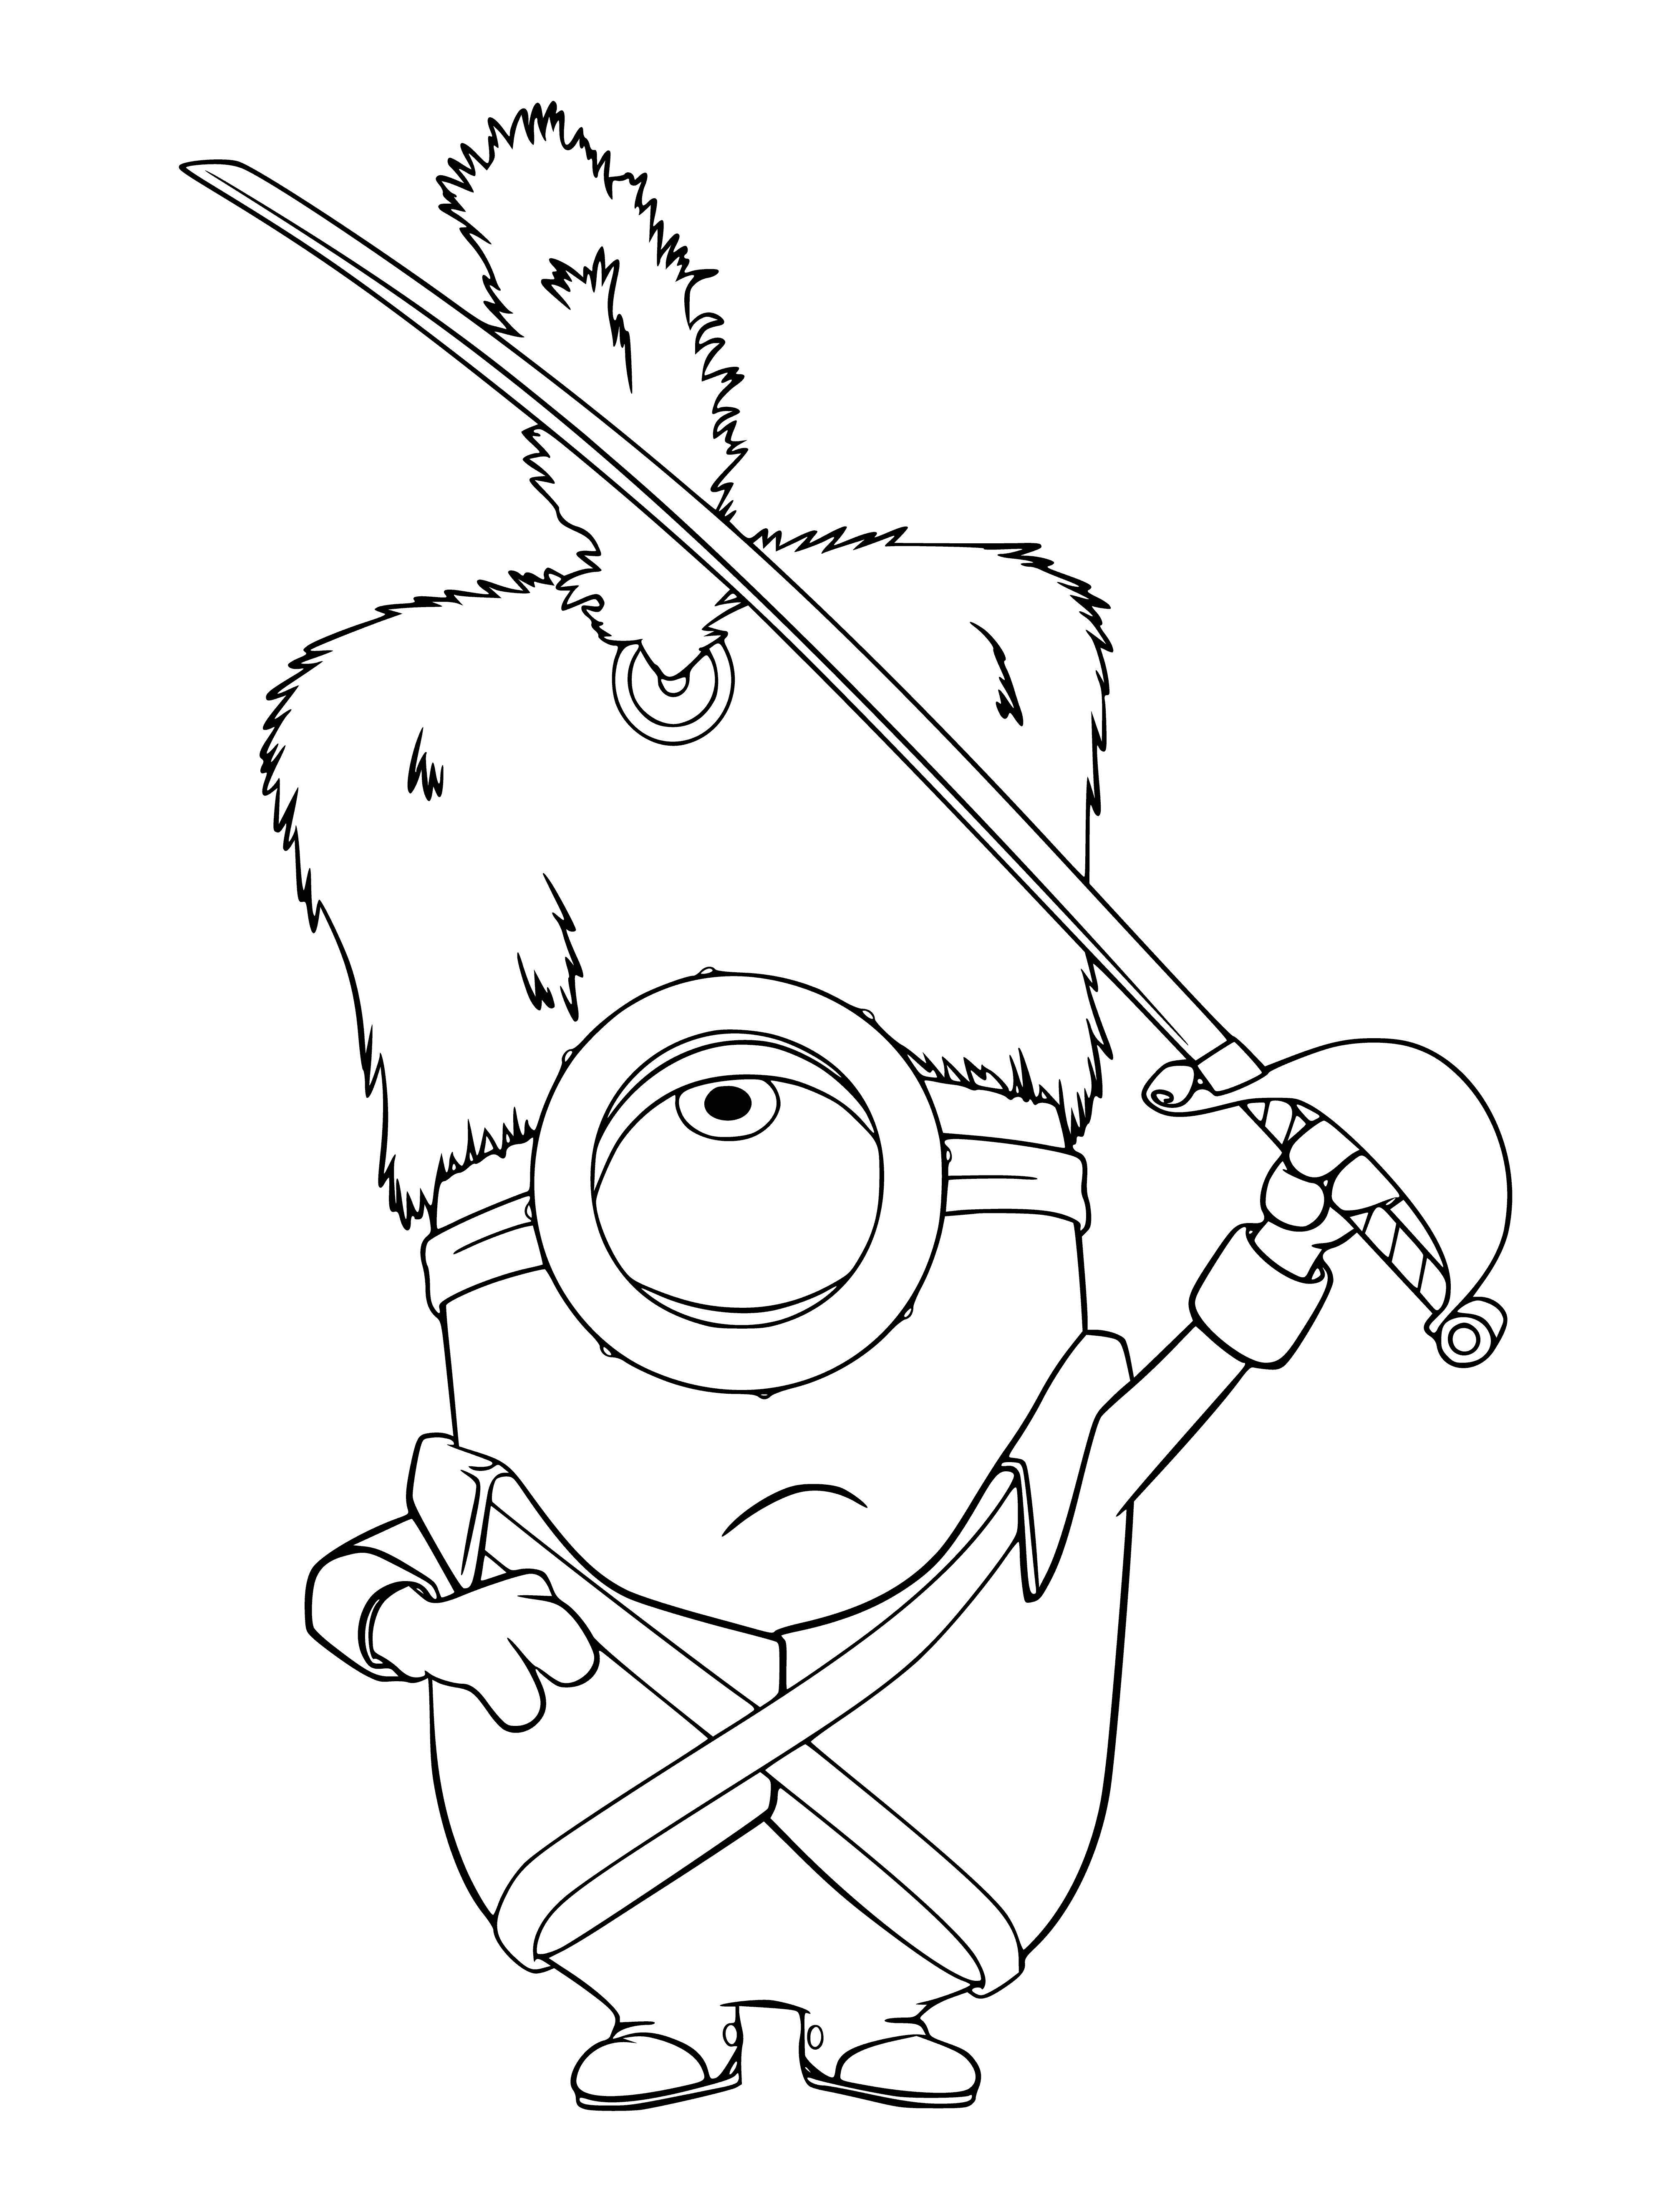 coloring page: Two minions, 1 taller than the other, wearing blue overalls, with large eyes & heads, both holding mics. #minions